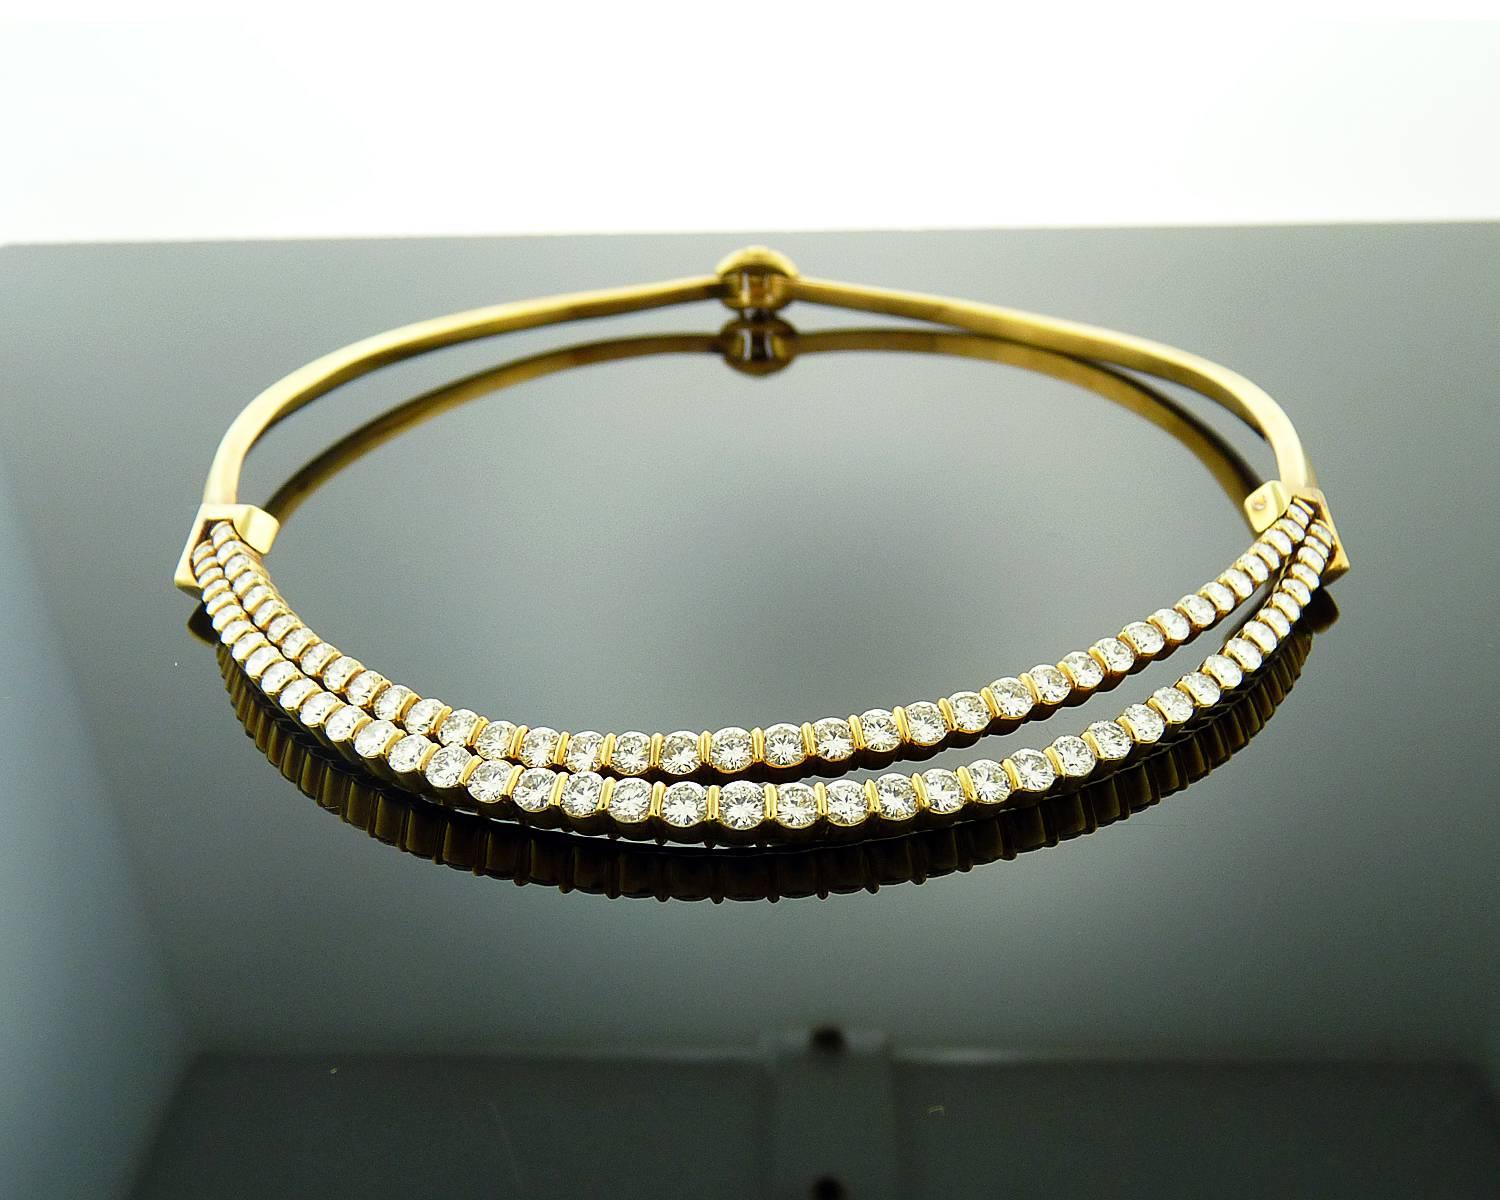 This stunning piece is finely crafted in 18K yellow gold and has a collar-length design. 
The necklace is composed of 82 Round Brilliant Cut Diamonds weighing approximately 10.00 carats and has two rows of bar-set graduated diamonds.
The largest,